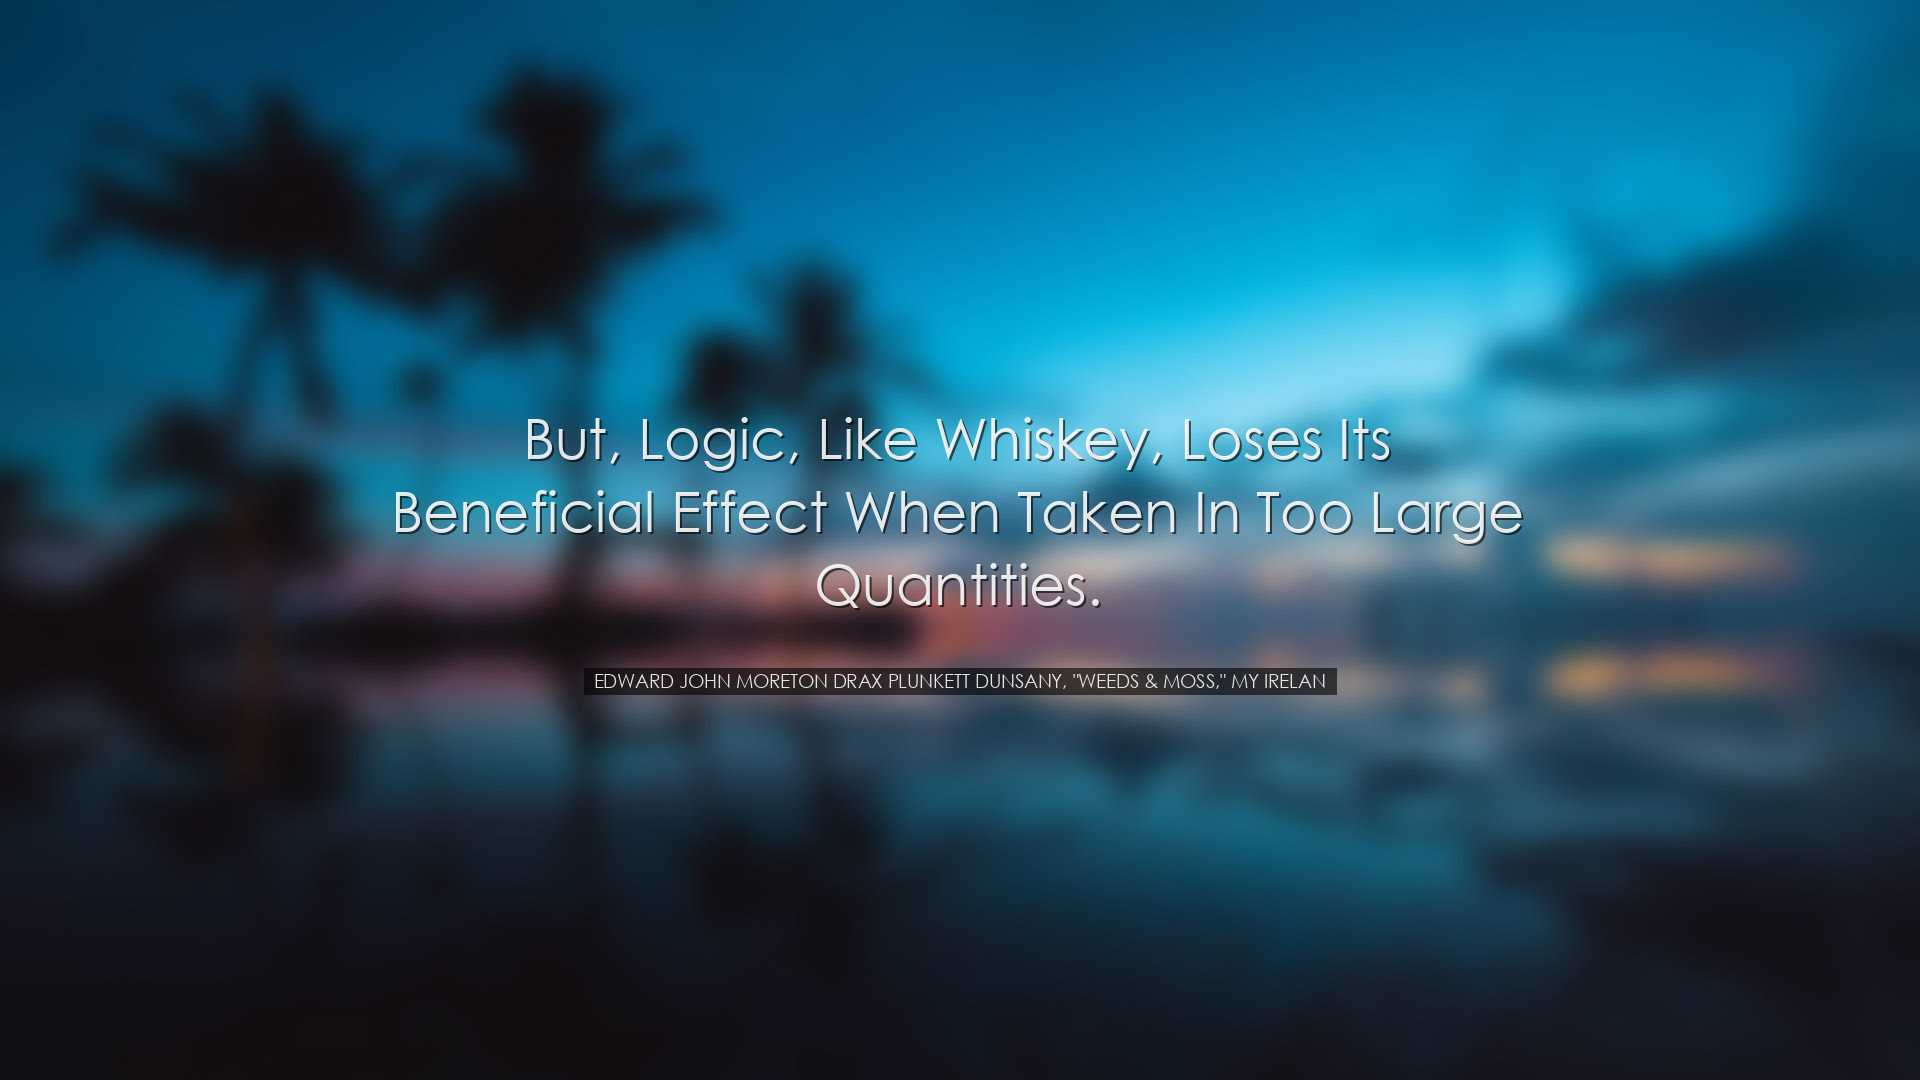 But, logic, like whiskey, loses its beneficial effect when taken i